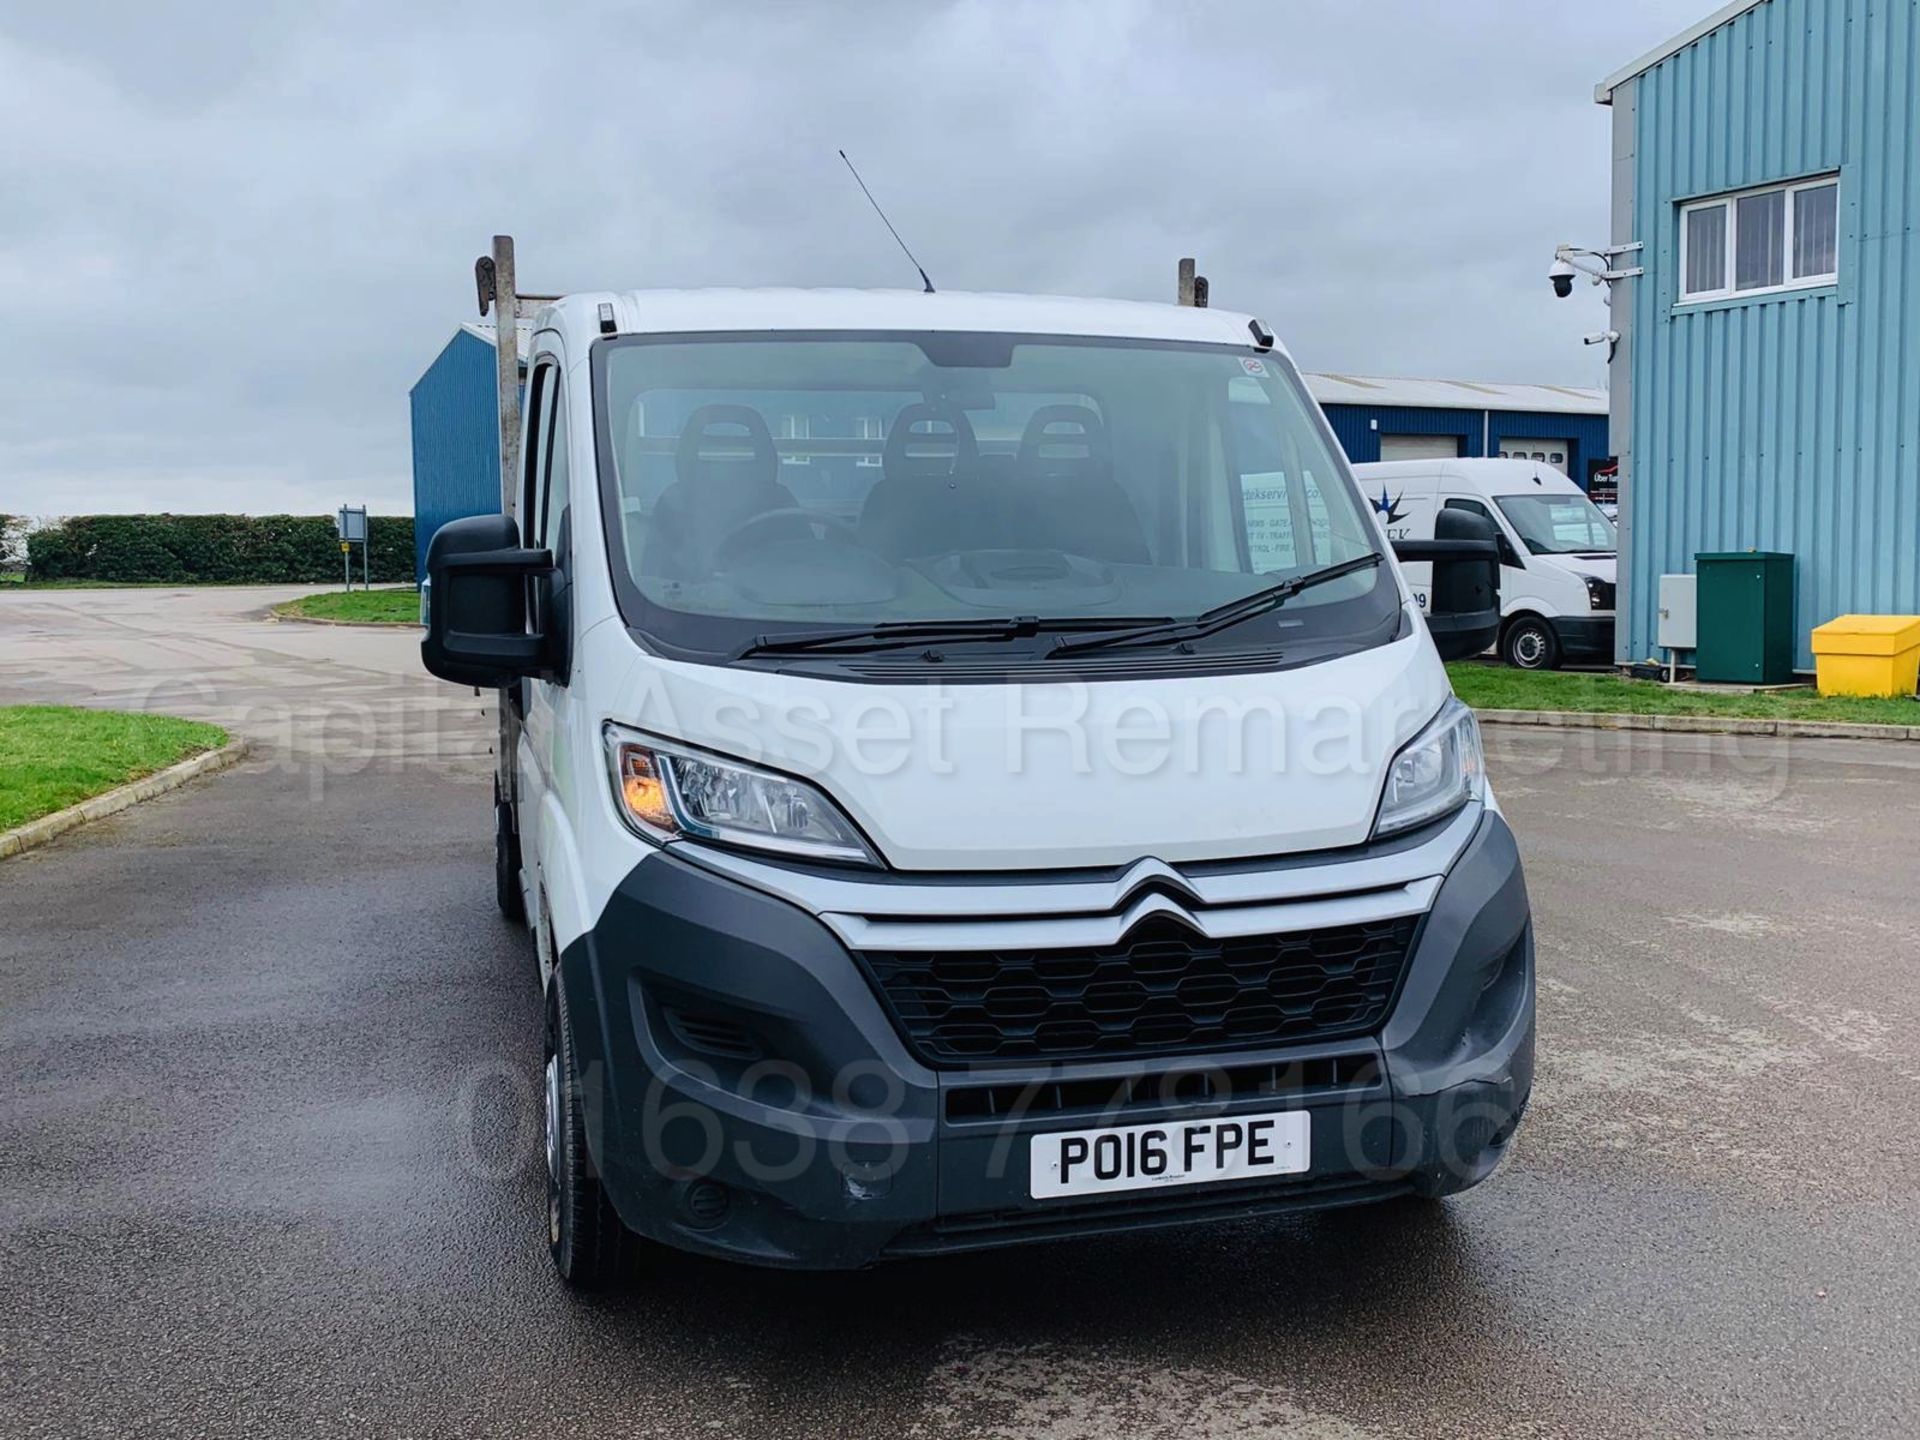 (ON SALE) CITROEN RELAY 35 *L3 - LWB 'ALLOY' DROPSIDE TRUCK* (2016) '2.2 HDI - 130 BHP' *LOW MILES* - Image 10 of 27